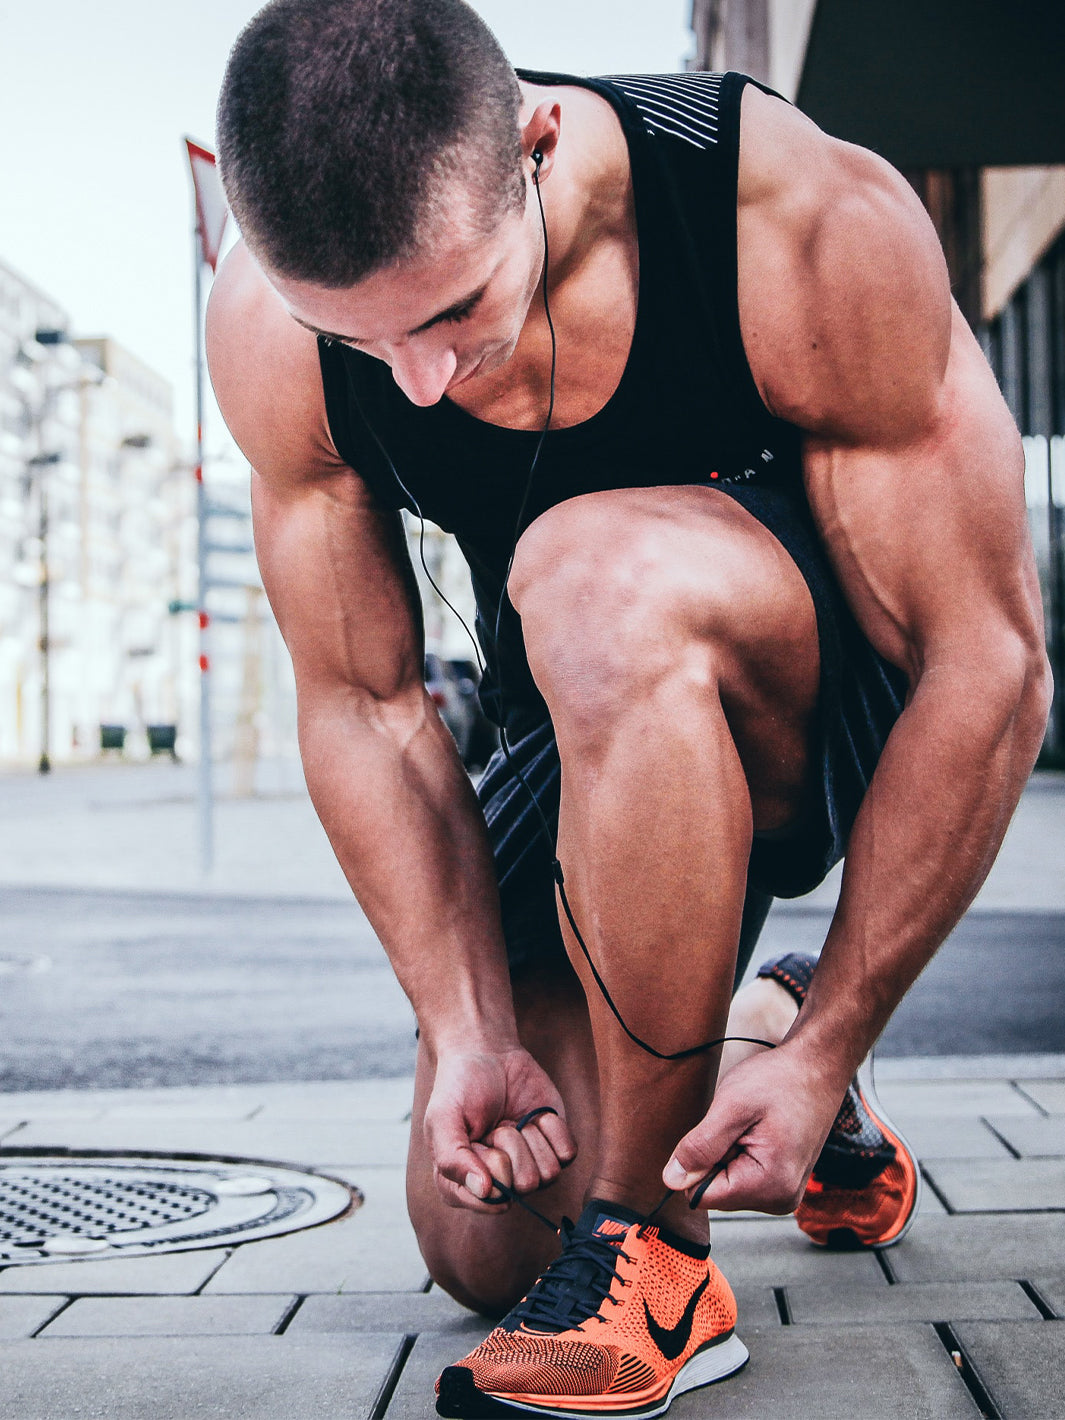 Athlete tying his shoes preparing for a workout